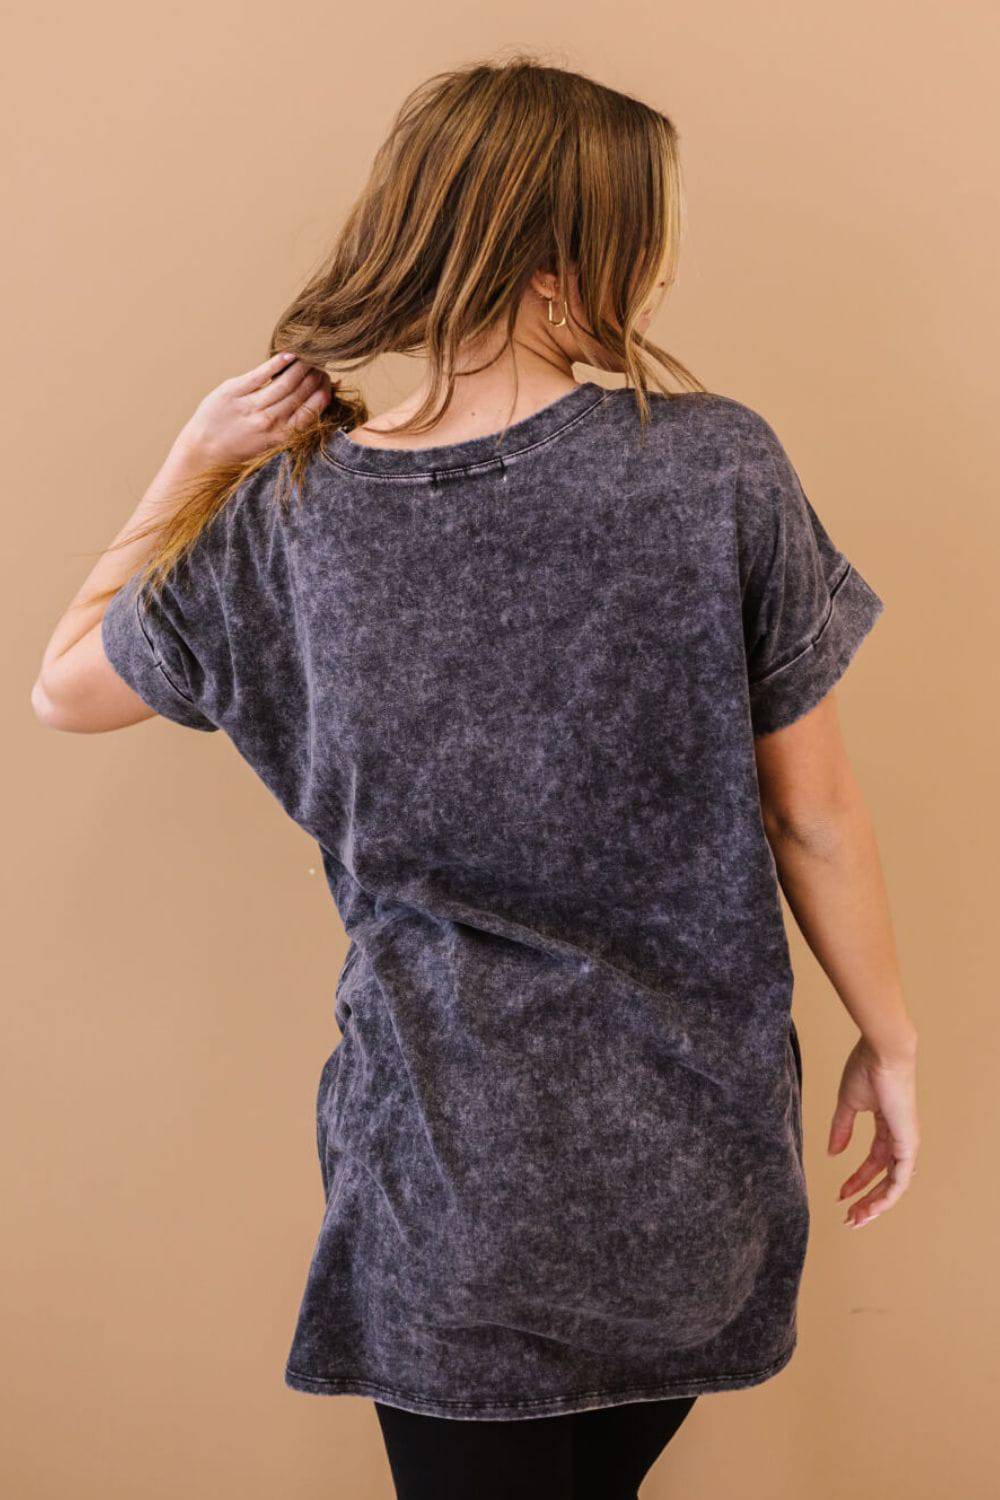 Zenana Memory Lane Full Size Run Mineral Wash Tee - Passion of Essence Boutique